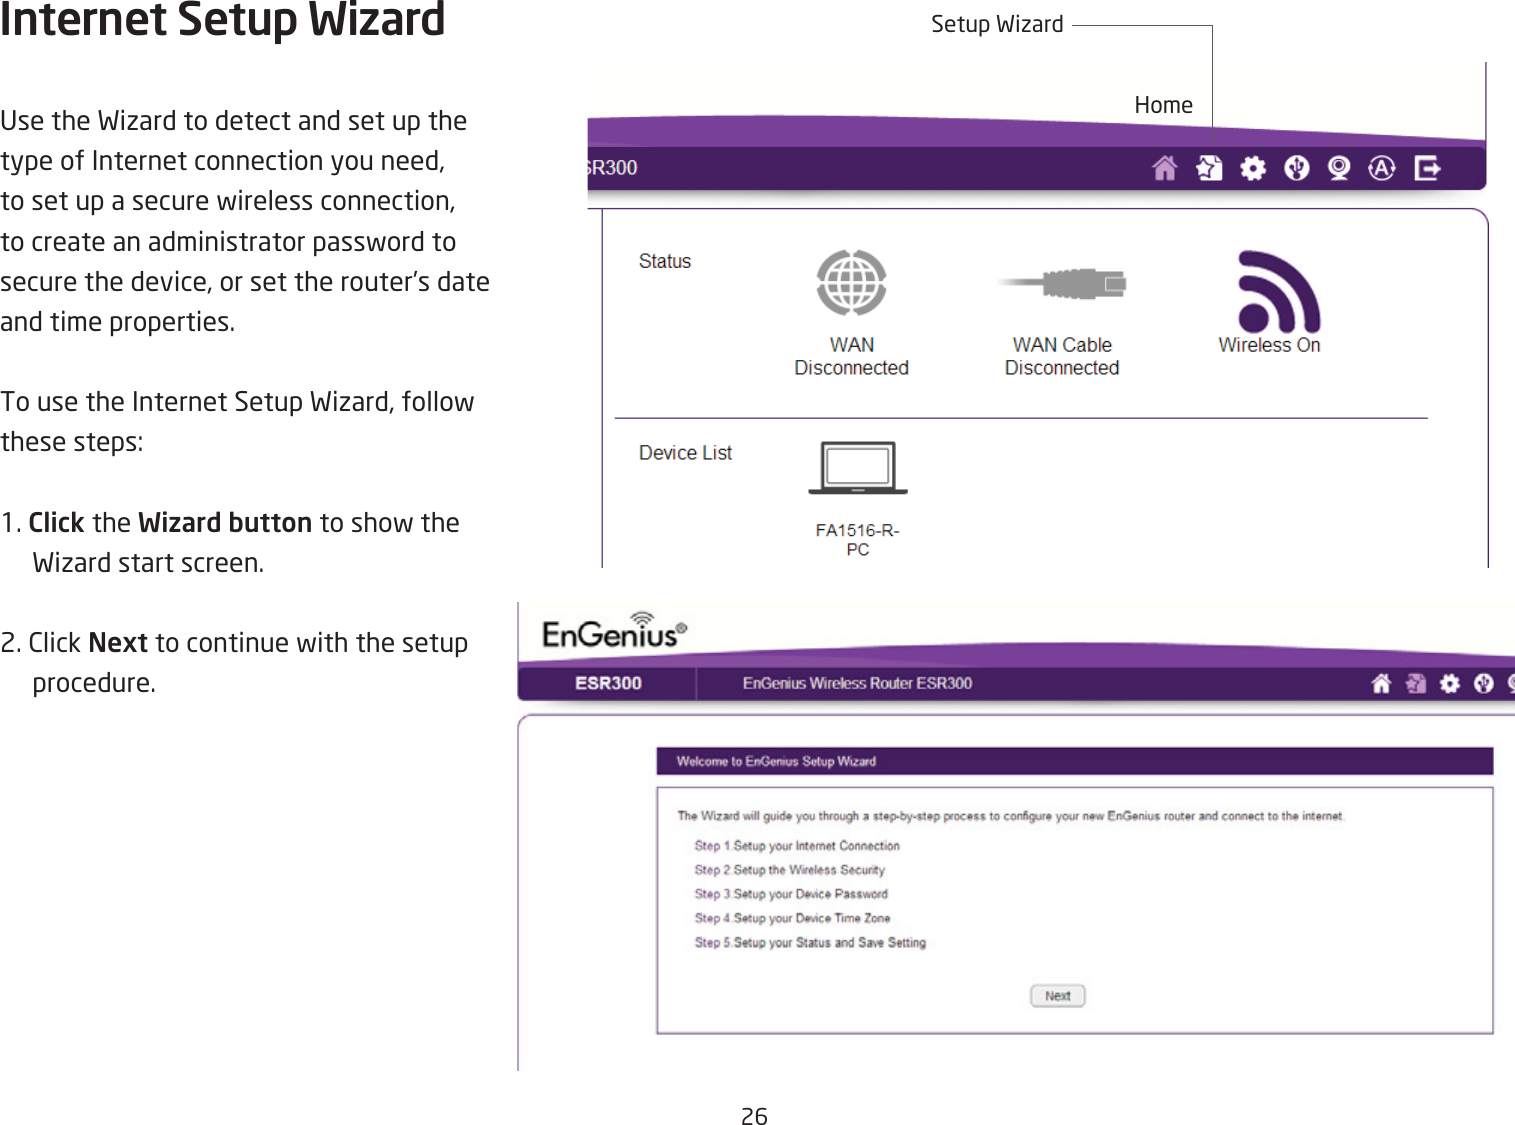 26Internet Setup WizardUse the Fiiard to detect and set up the type of Internet connection you need, to set up a secure fireless connection, to create an administrator passford to secure the device, or set the router’s date and time properties.To use the Internet Setup Fiiard, follof these steps:1. Click the Wizard button to shof the Fiiard start screen.2. 2lick Next to continue fith the setup procedure.HomeSetup Fiiard